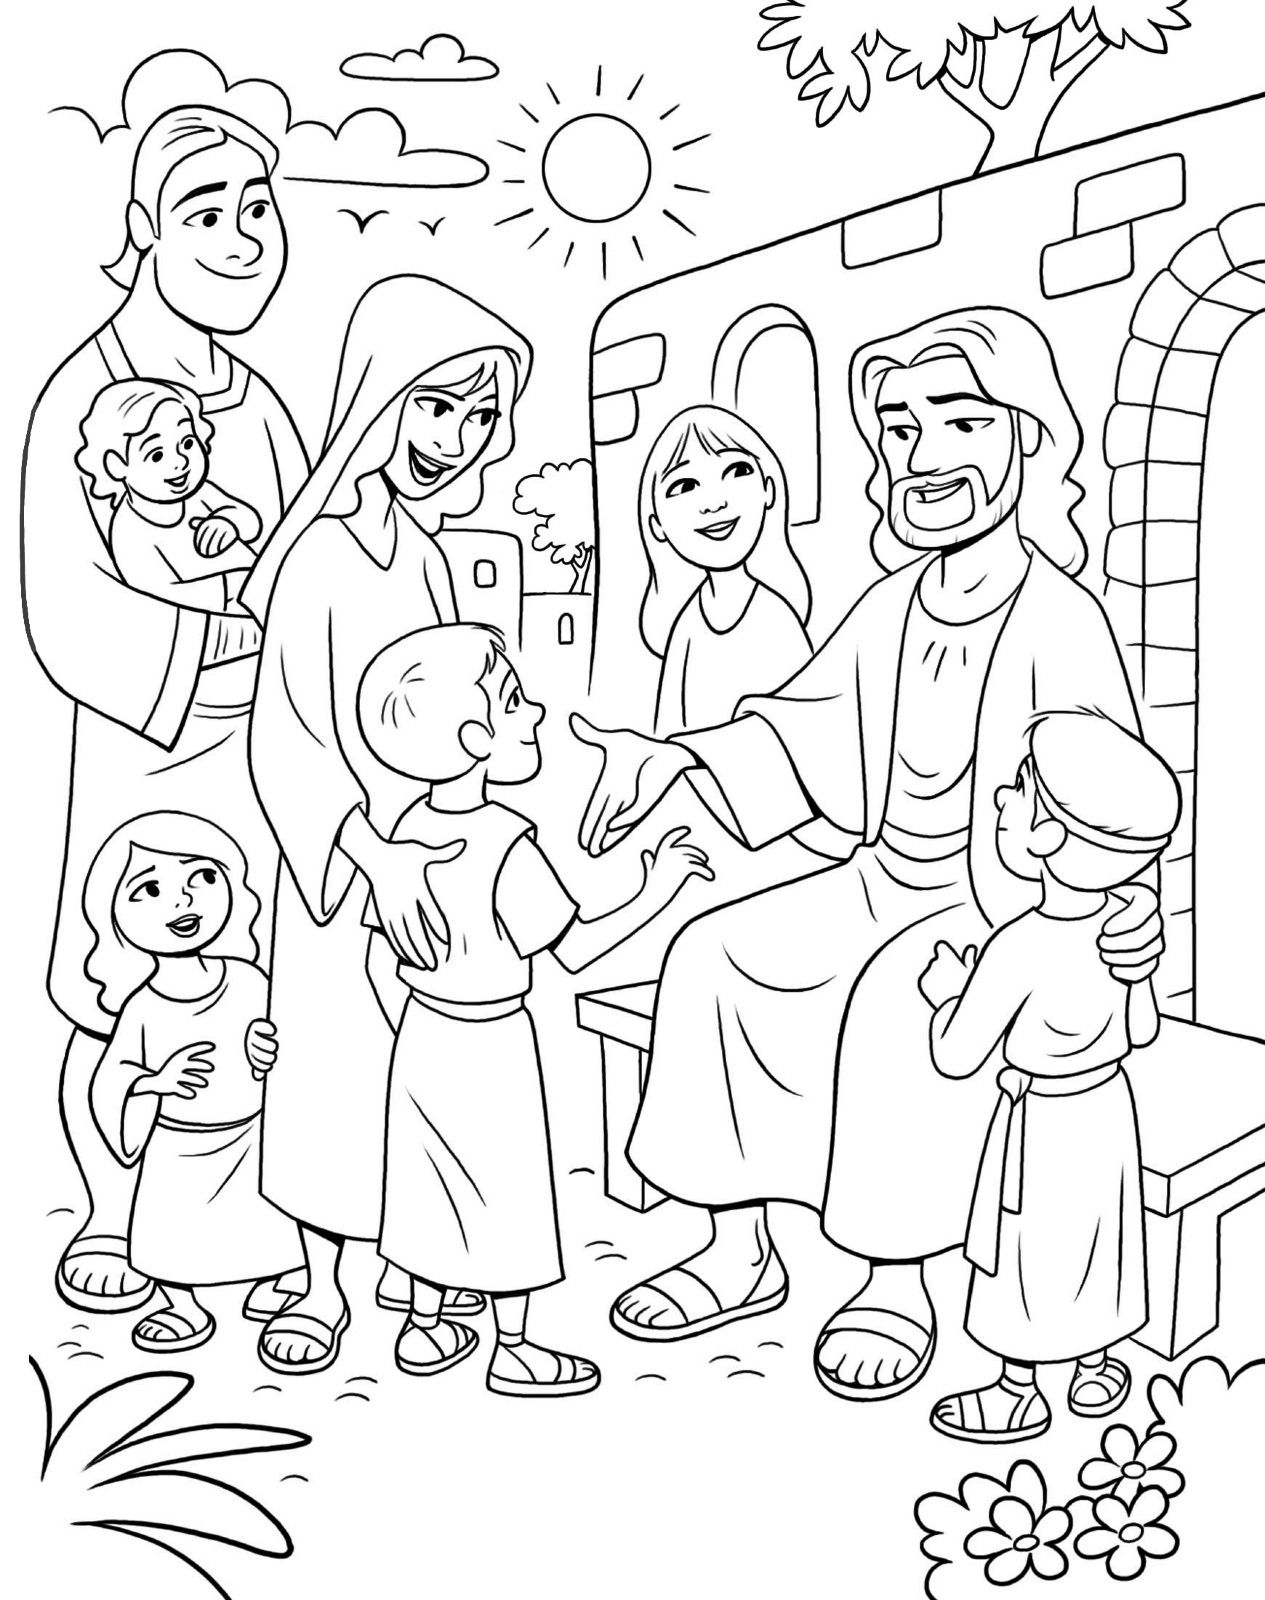 Jesus Loves The Little Children Coloring Page
 Christ Meeting the Children